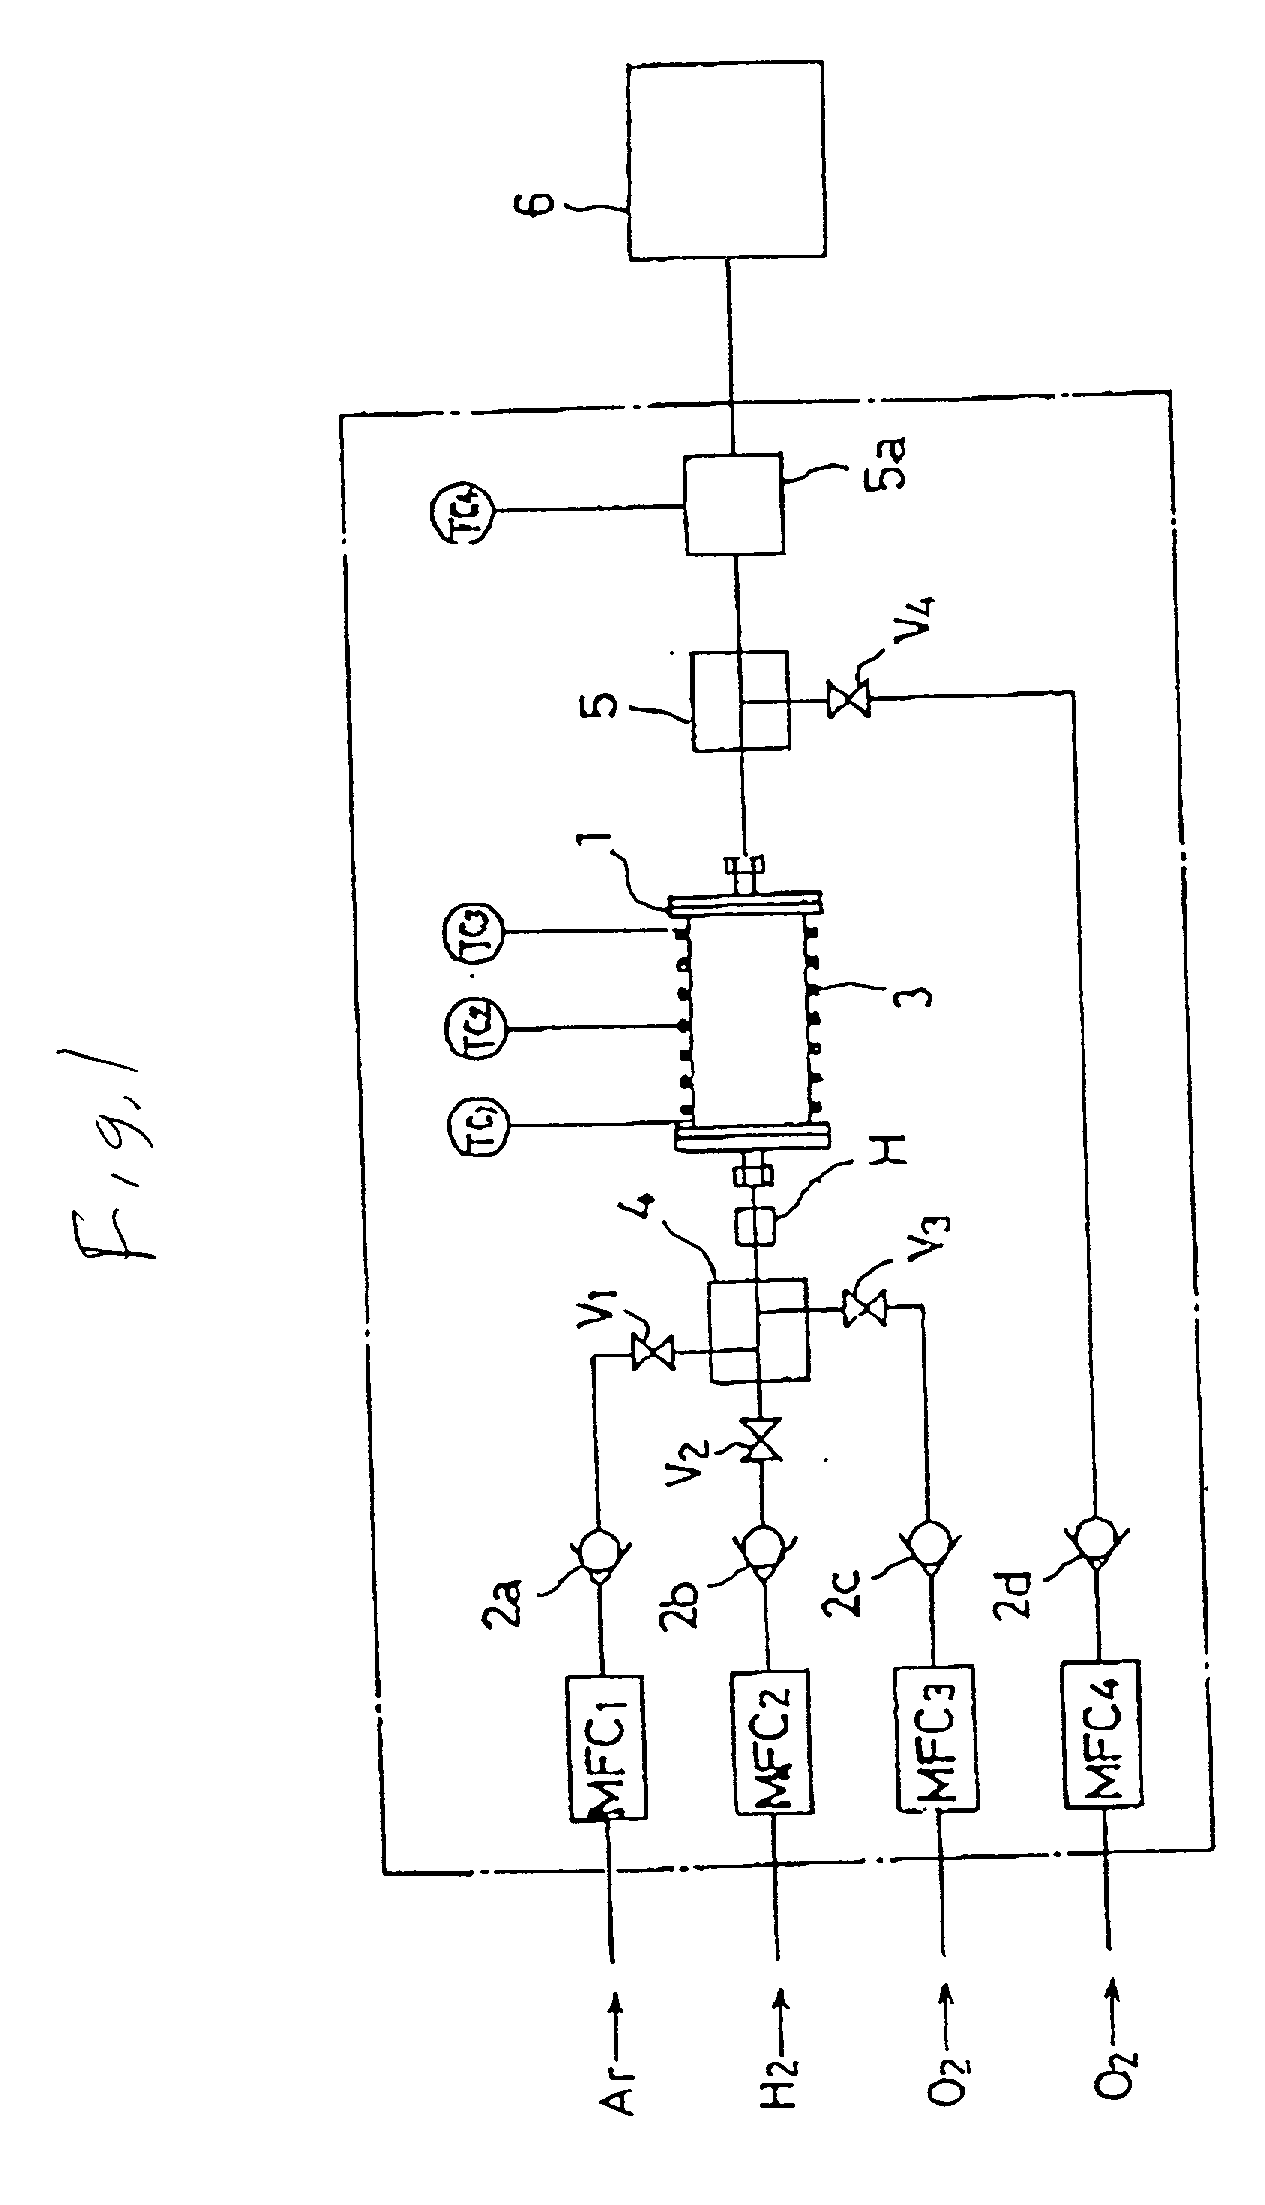 Method for generating moisture, reactor for generating moisture, method for controlling temperature of reactor for generating moisture, and method for forming platinum-coated catalyst layer